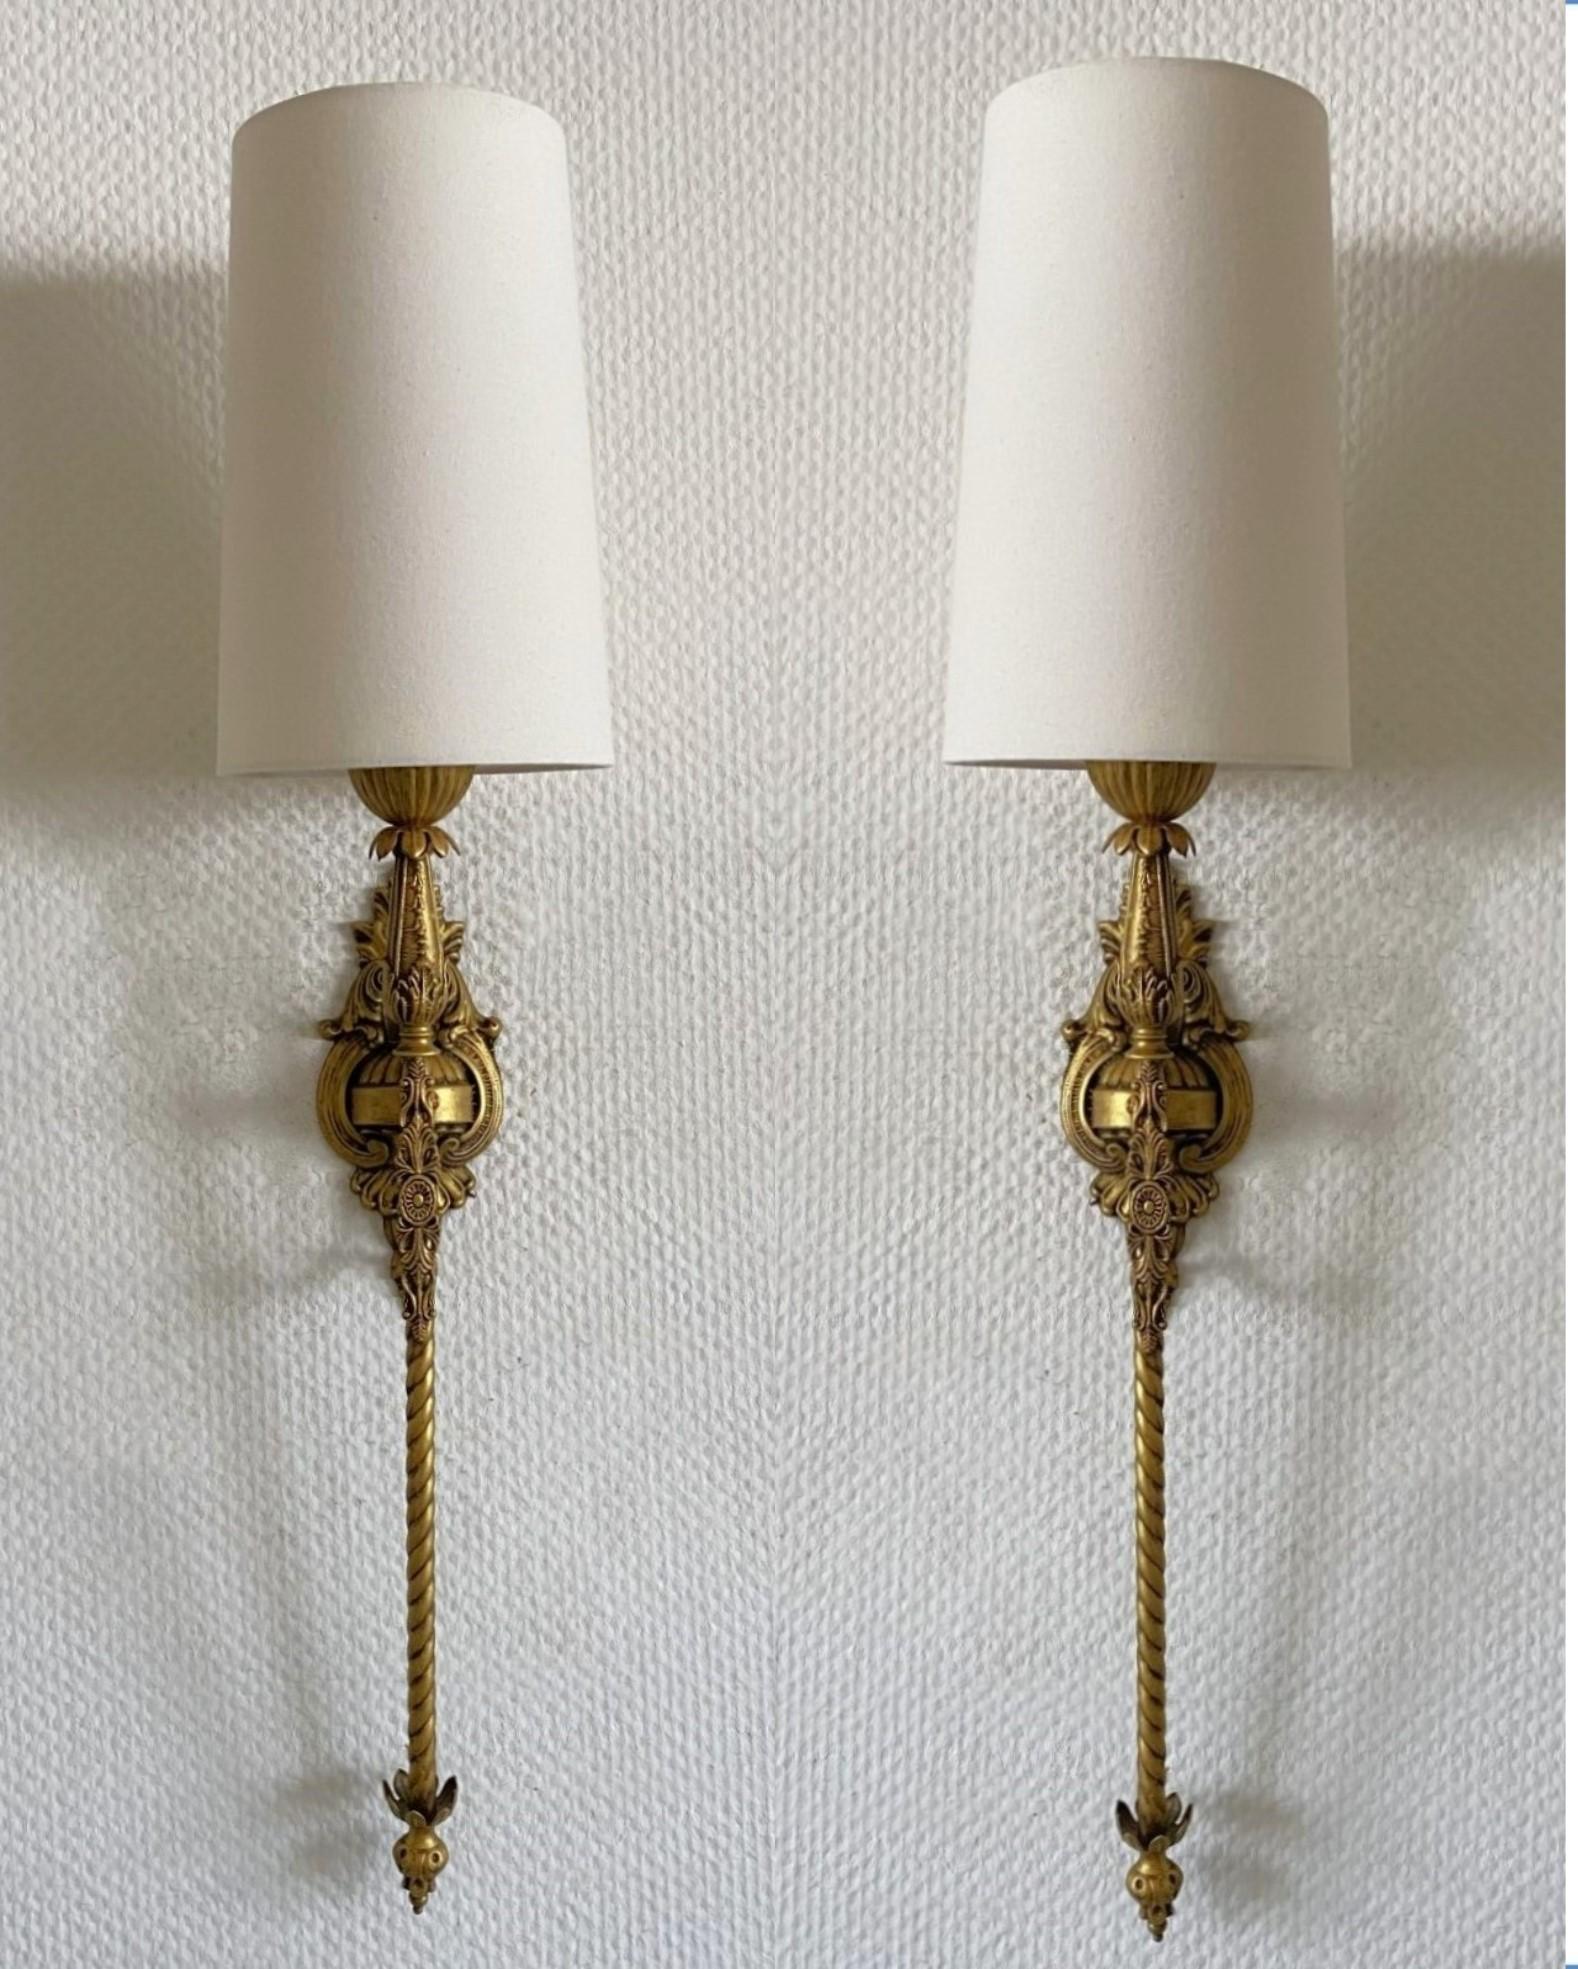 Pair of superb tall Art Deco bronze wall torchieres sconces or wall lanterns richly decorated with fine details from a  mansion in South of France, 1930s. The wall torchieres had been converted to electric wall lights at a later time. Each sconce